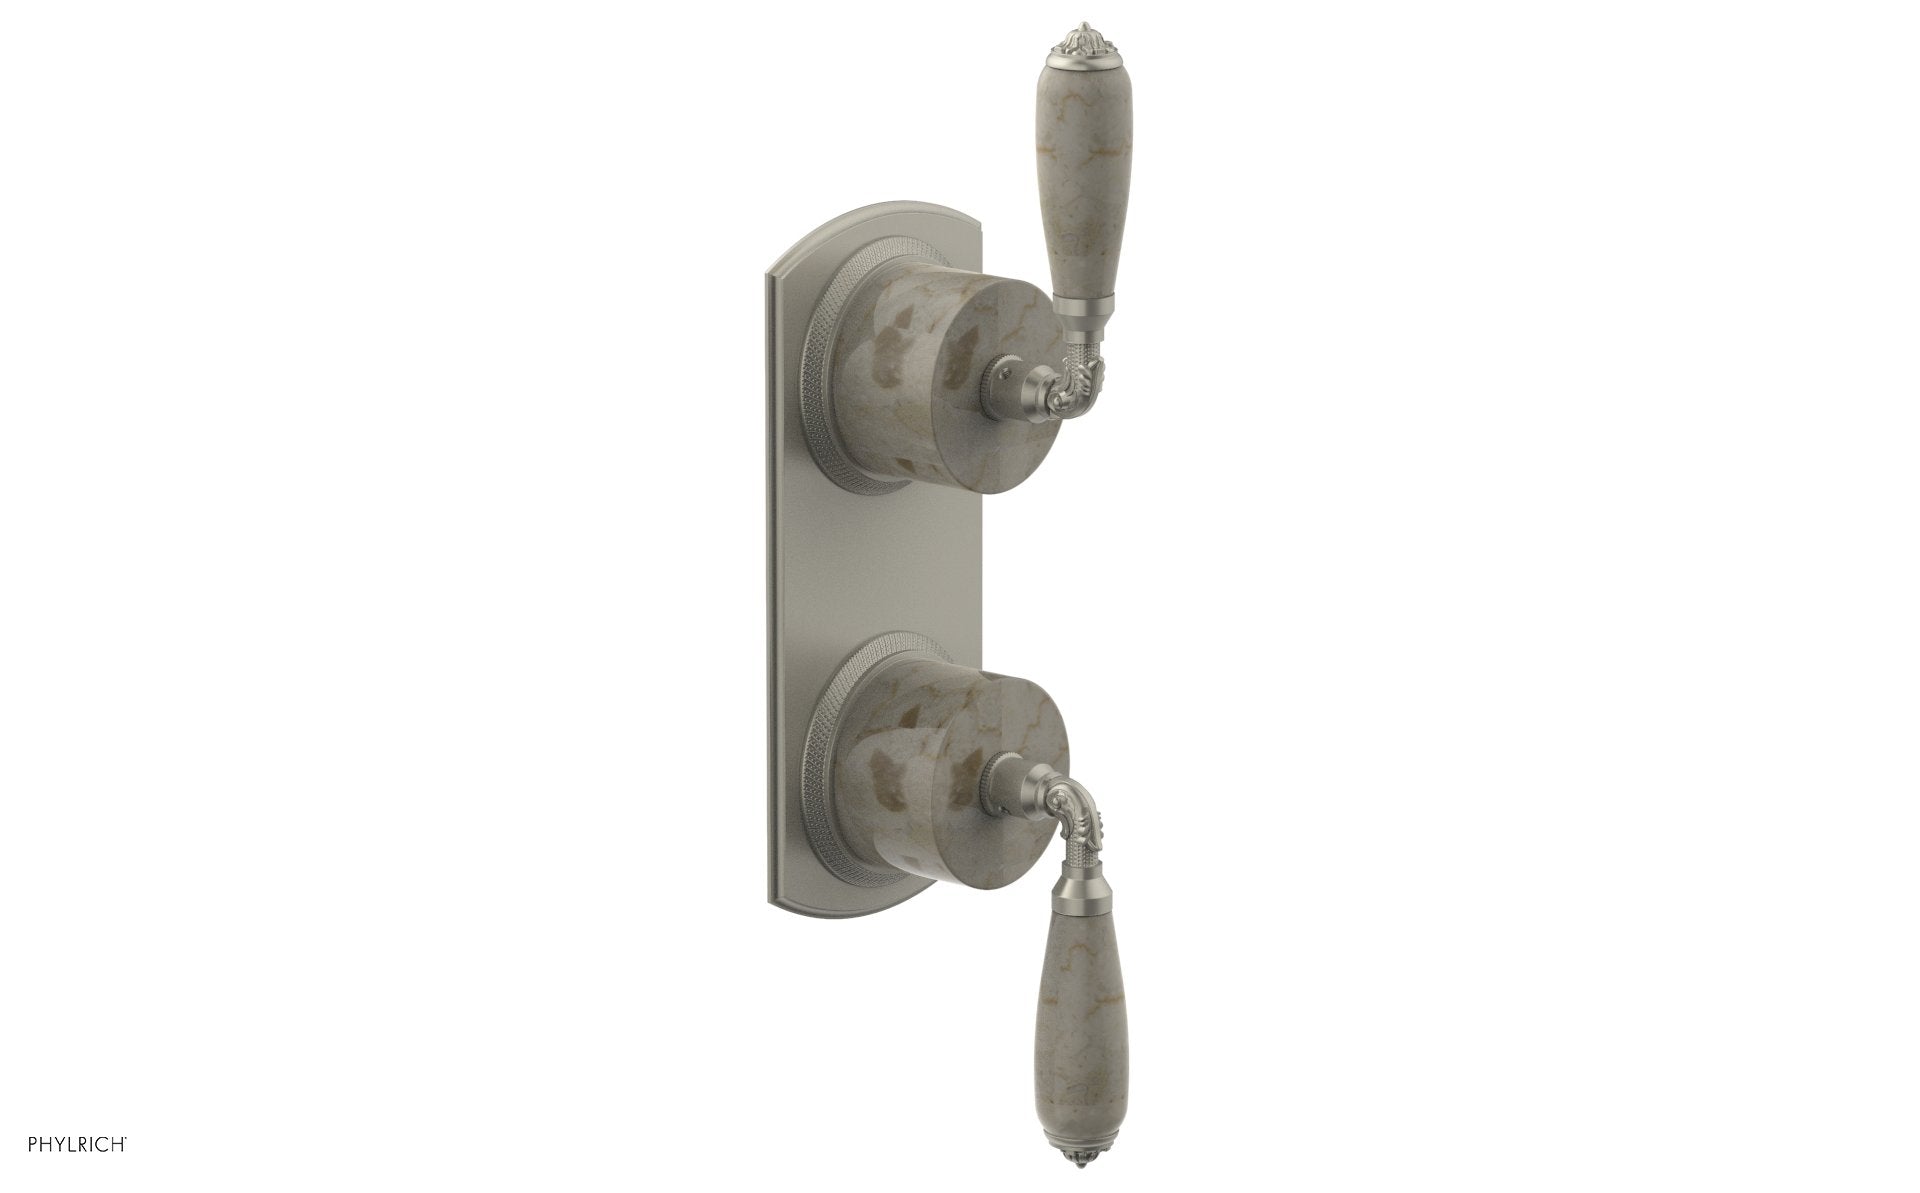 Phylrich VALENCIA Thermostatic Valve with Volume Control or Diverter, Beige Marble Lever Handles